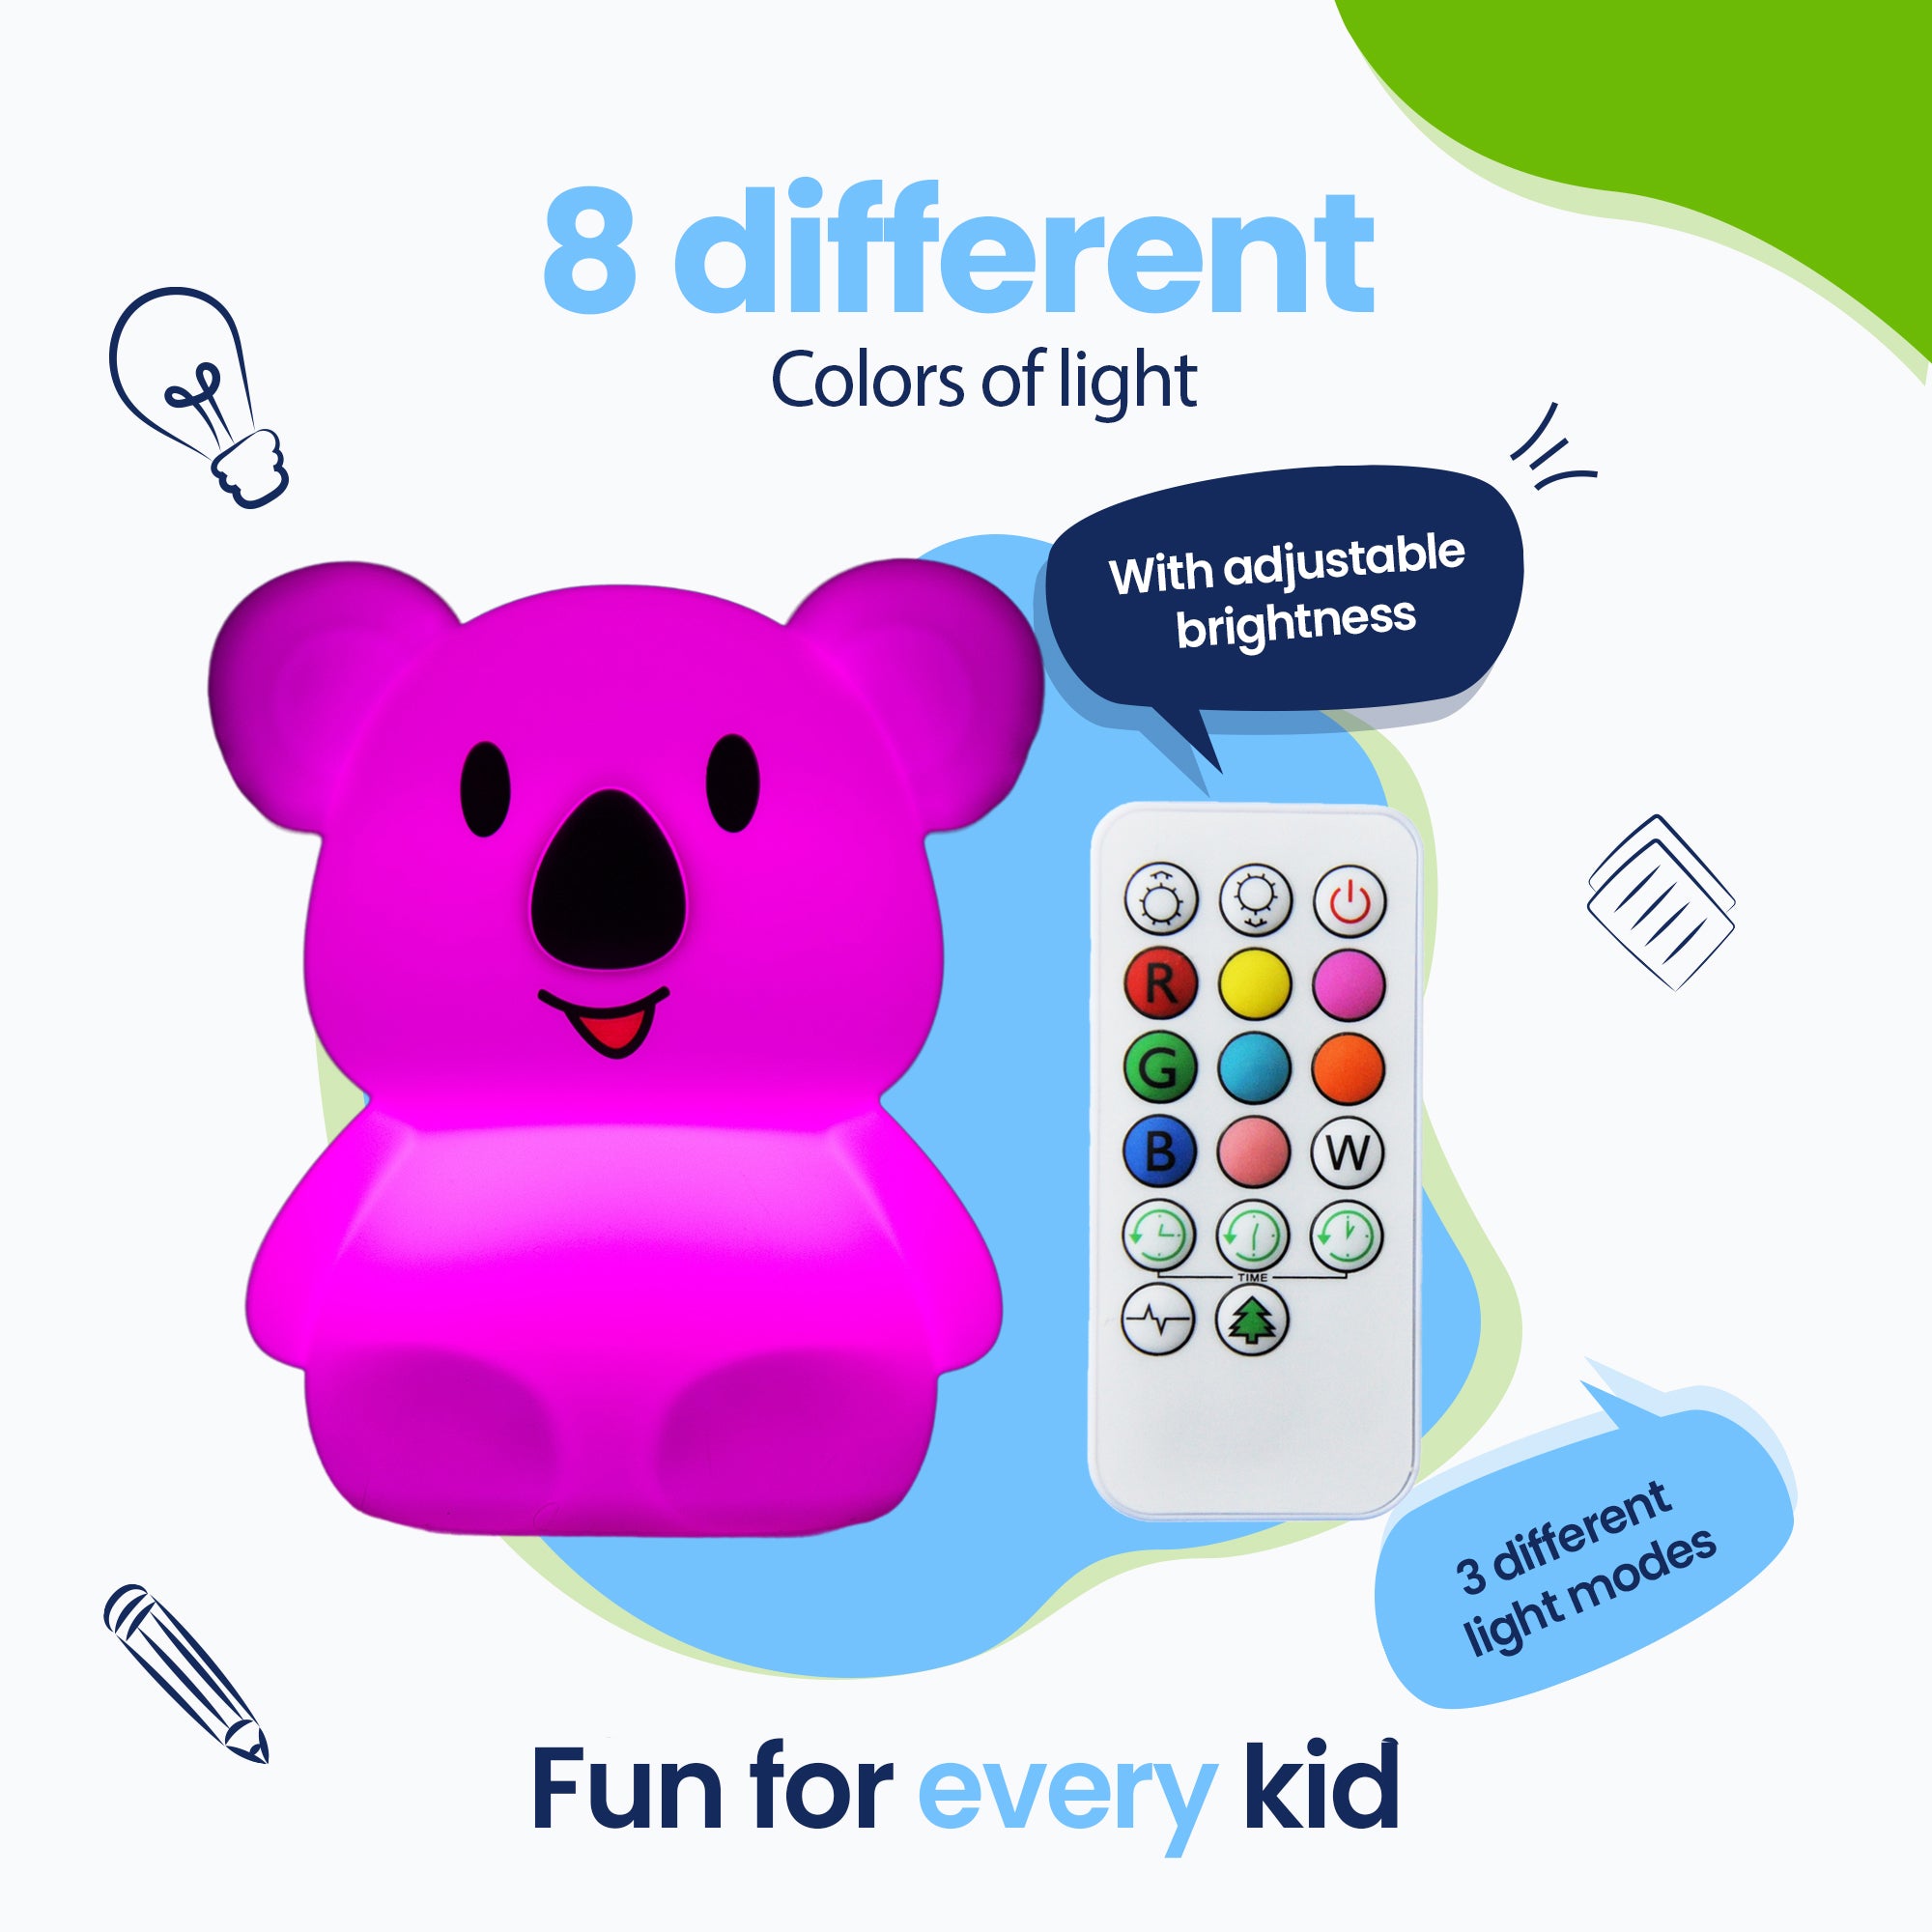 8 Different colors of light - 3 different light modes - Fun for every child